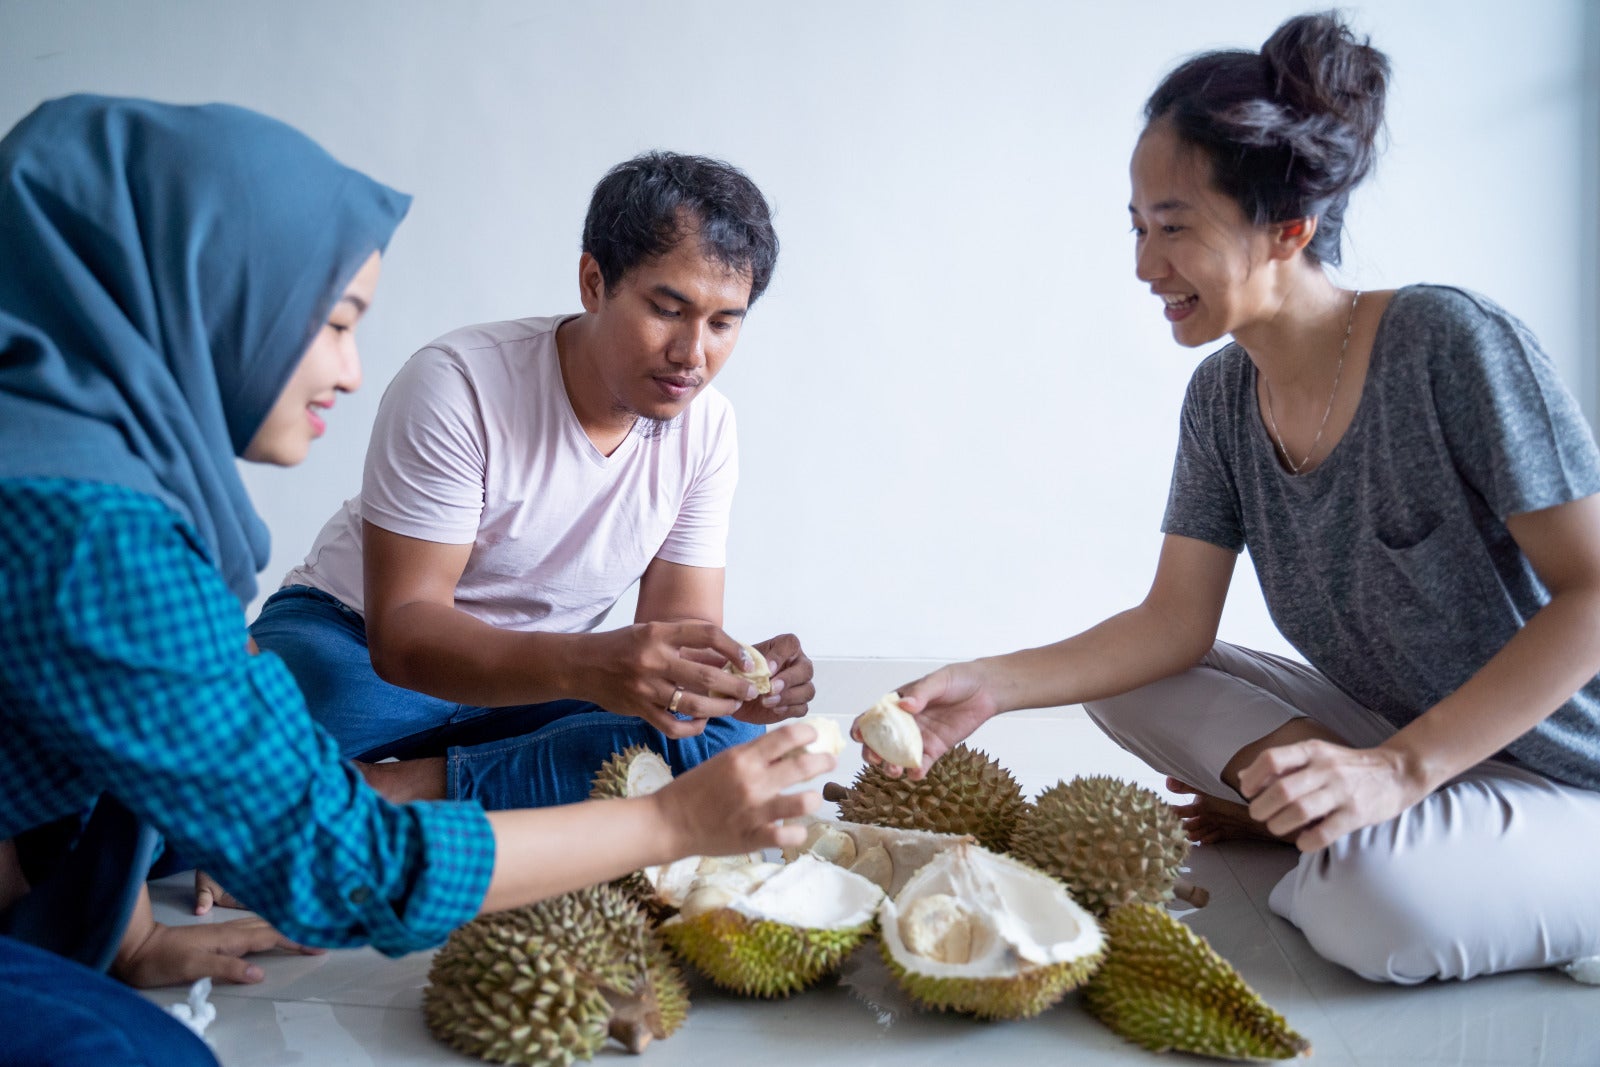 eating durian